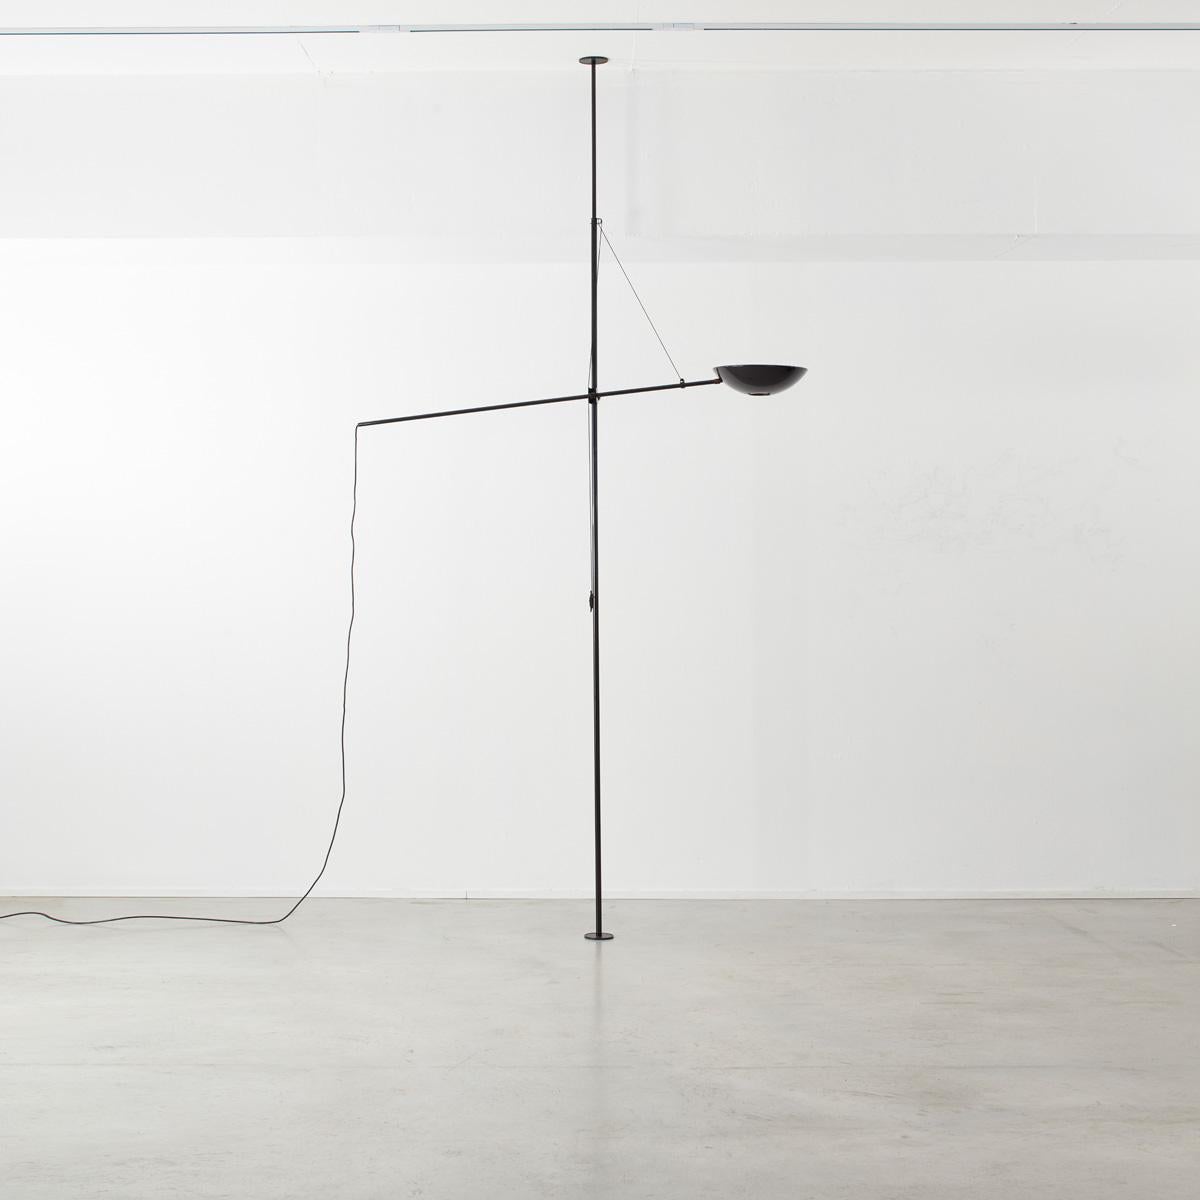 The Bigo floor to ceiling lamp by Italian manufacturer Valenti is an interesting architectural exploration of the possibilities of interior lighting. The main stem is height adjustable allowing the user to compress it between the floor and ceiling